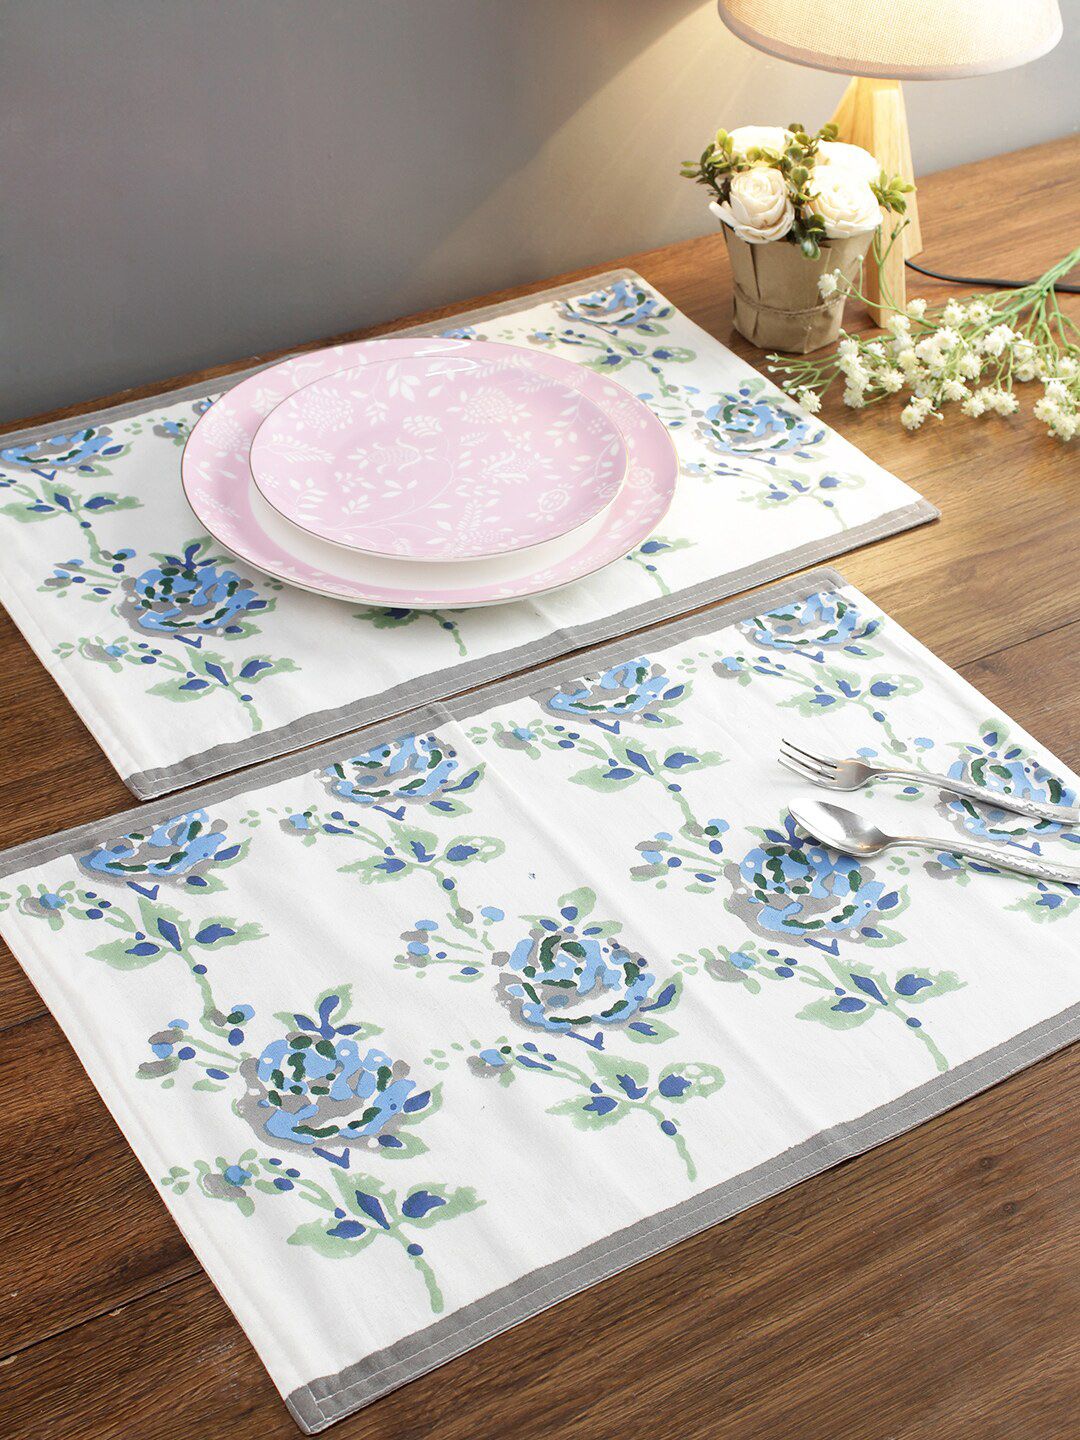 Rajasthan Decor Set Of 6 White & Blue Floral Printed Sustainable Table Placemats Price in India